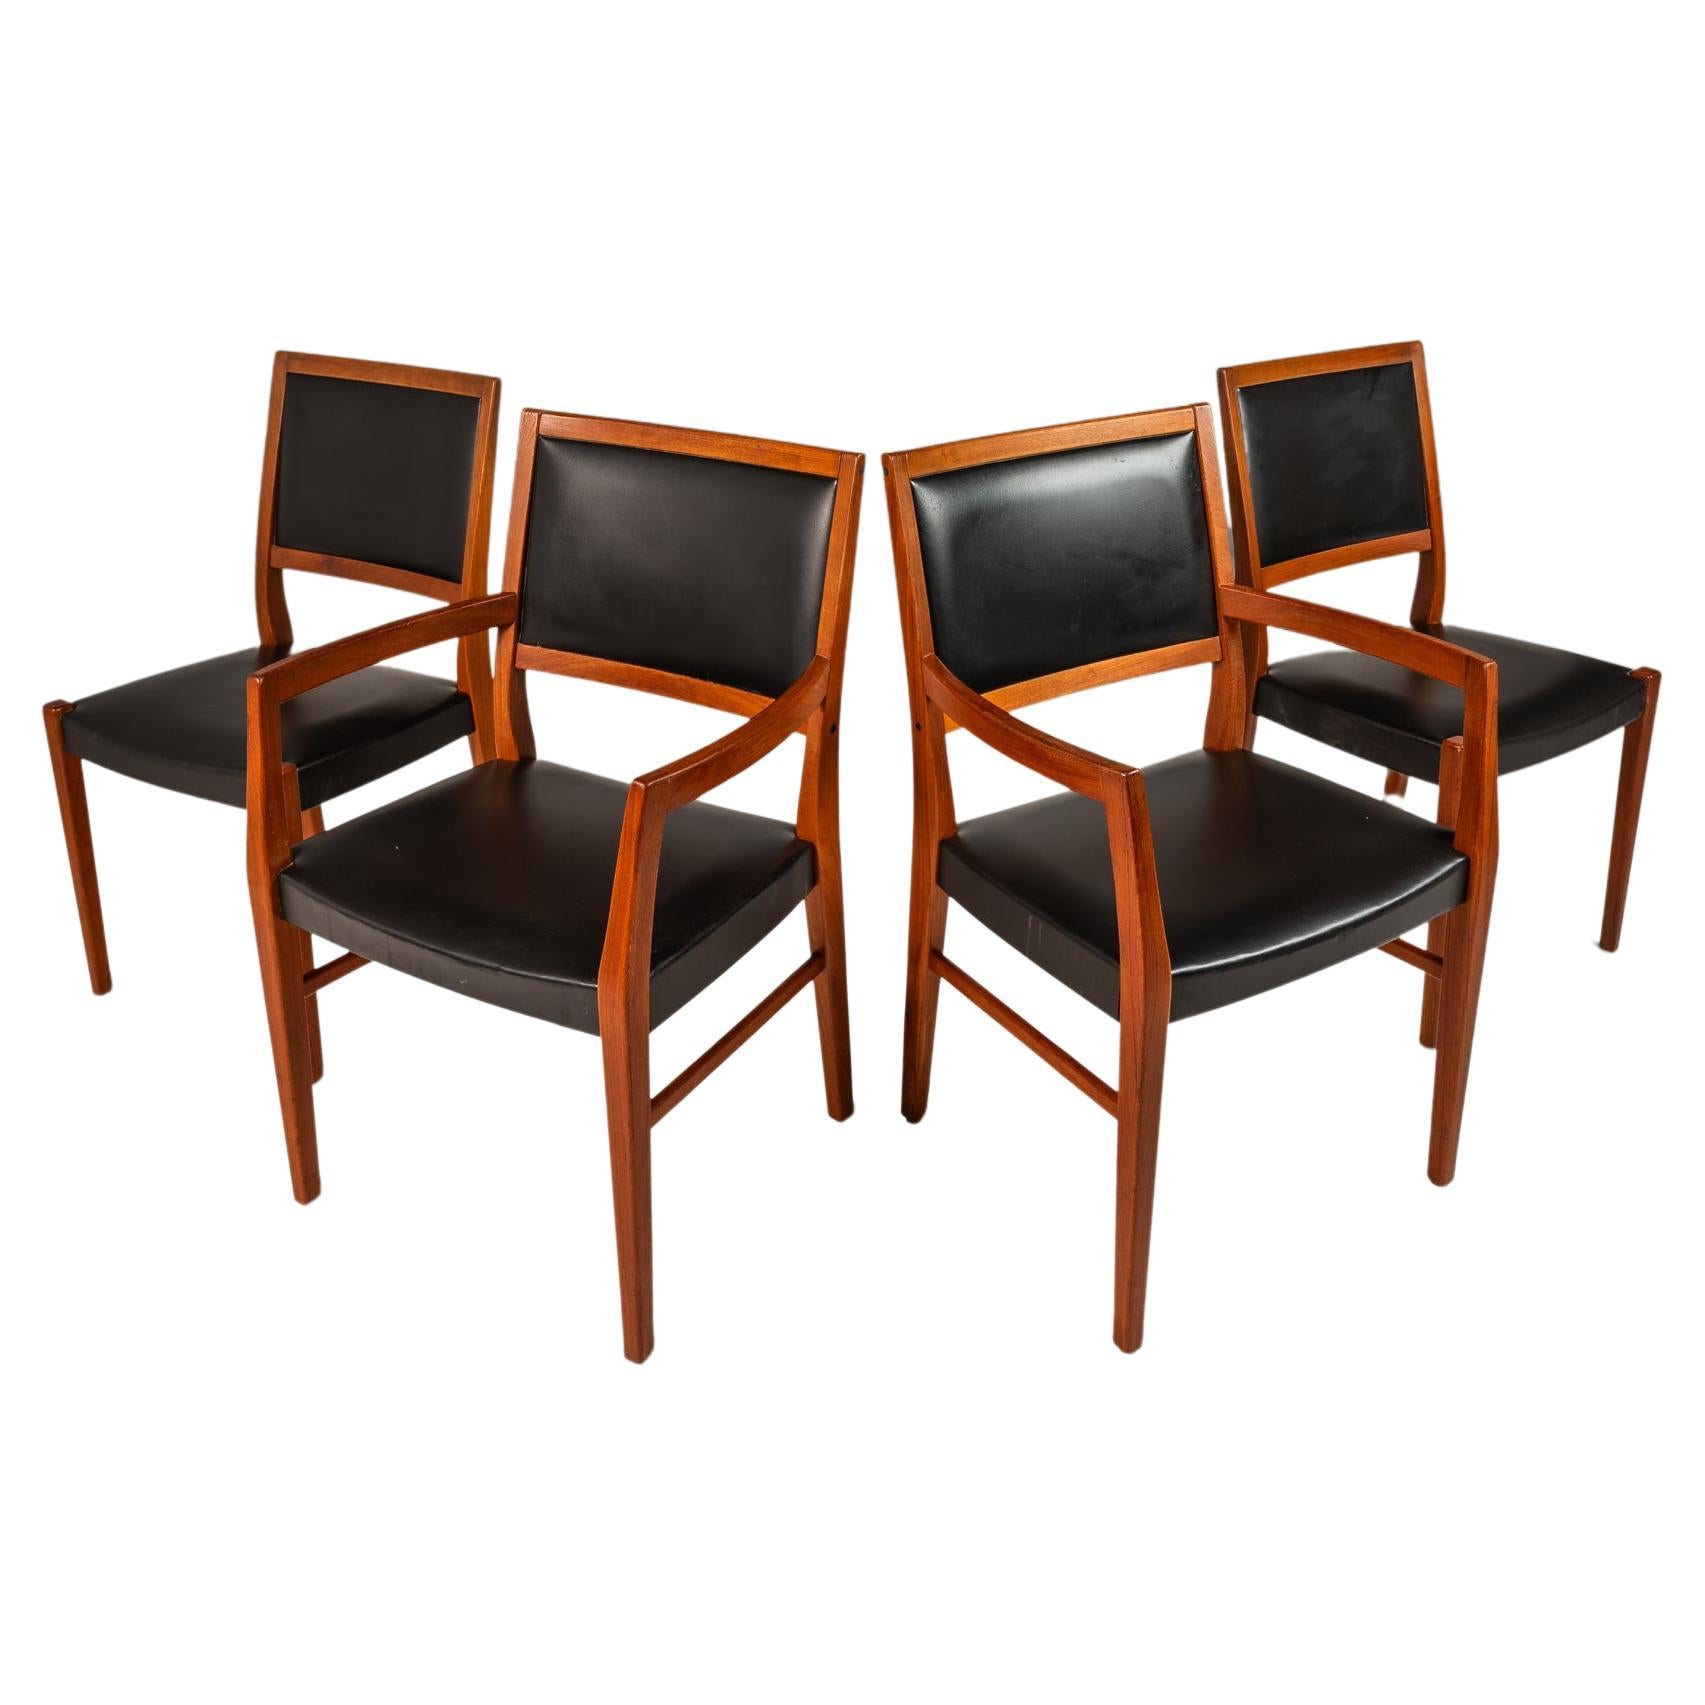 Set of 4 Mid-Century Teak Dining Chairs by Svegards Markaryd, Sweden, c. 1960s